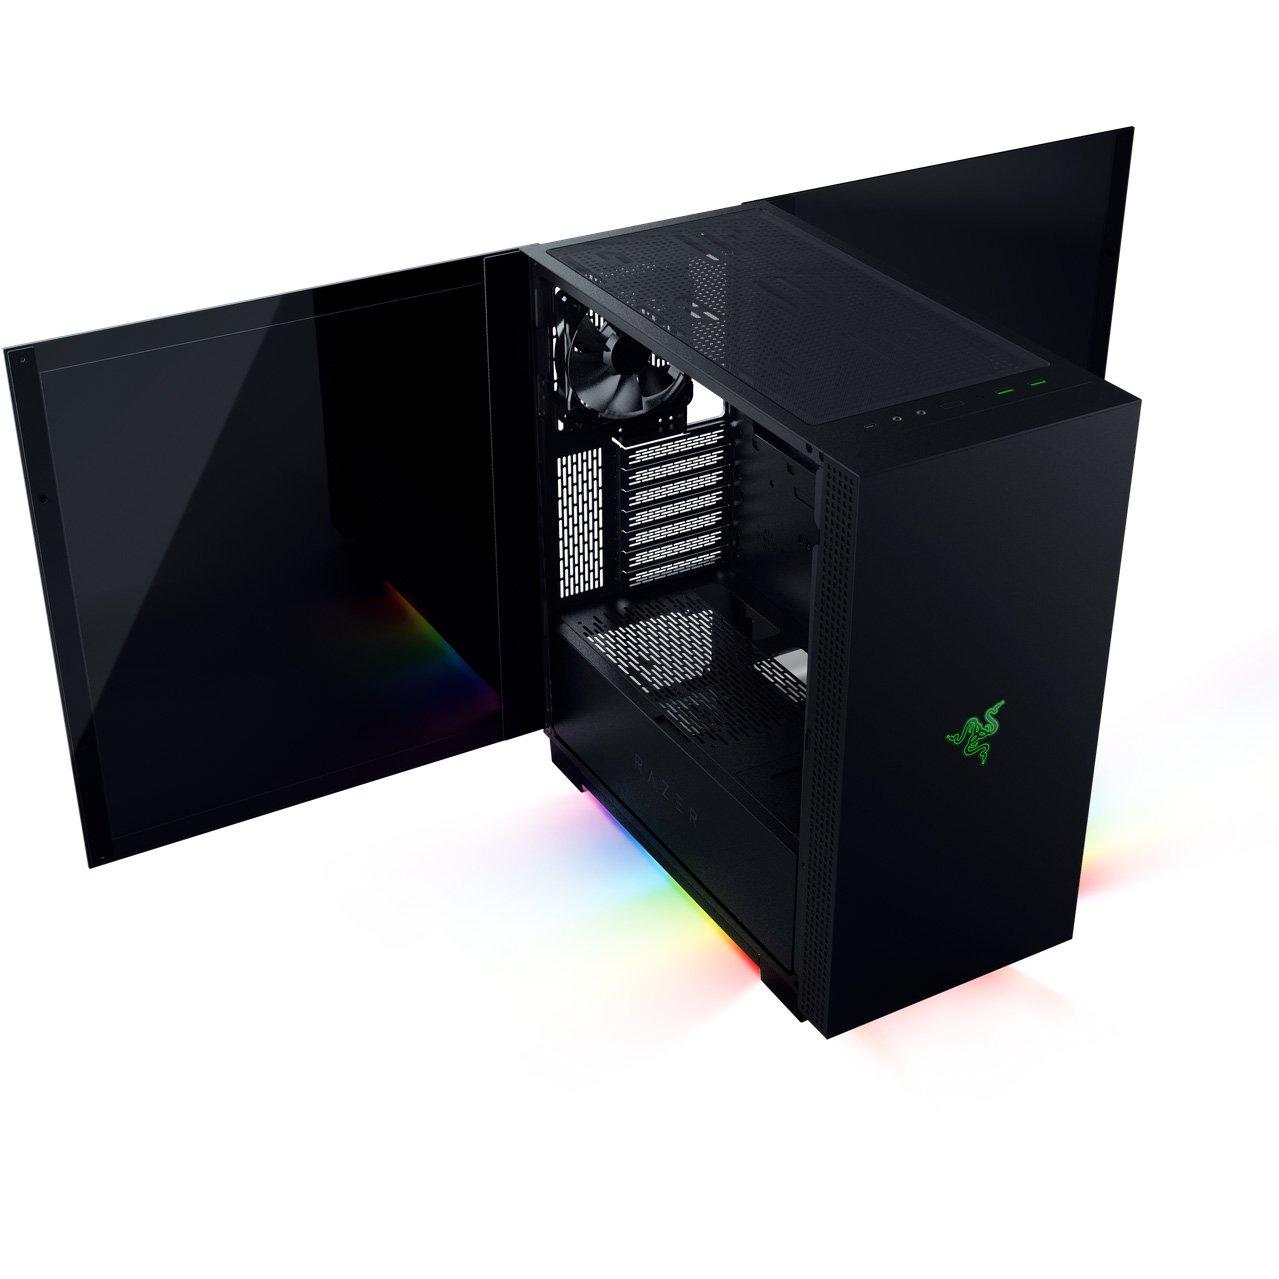 list item 5 of 6 Razer Tomahawk Tempered Glass ATX Mid-Tower Gaming Computer Case with Chroma RGB